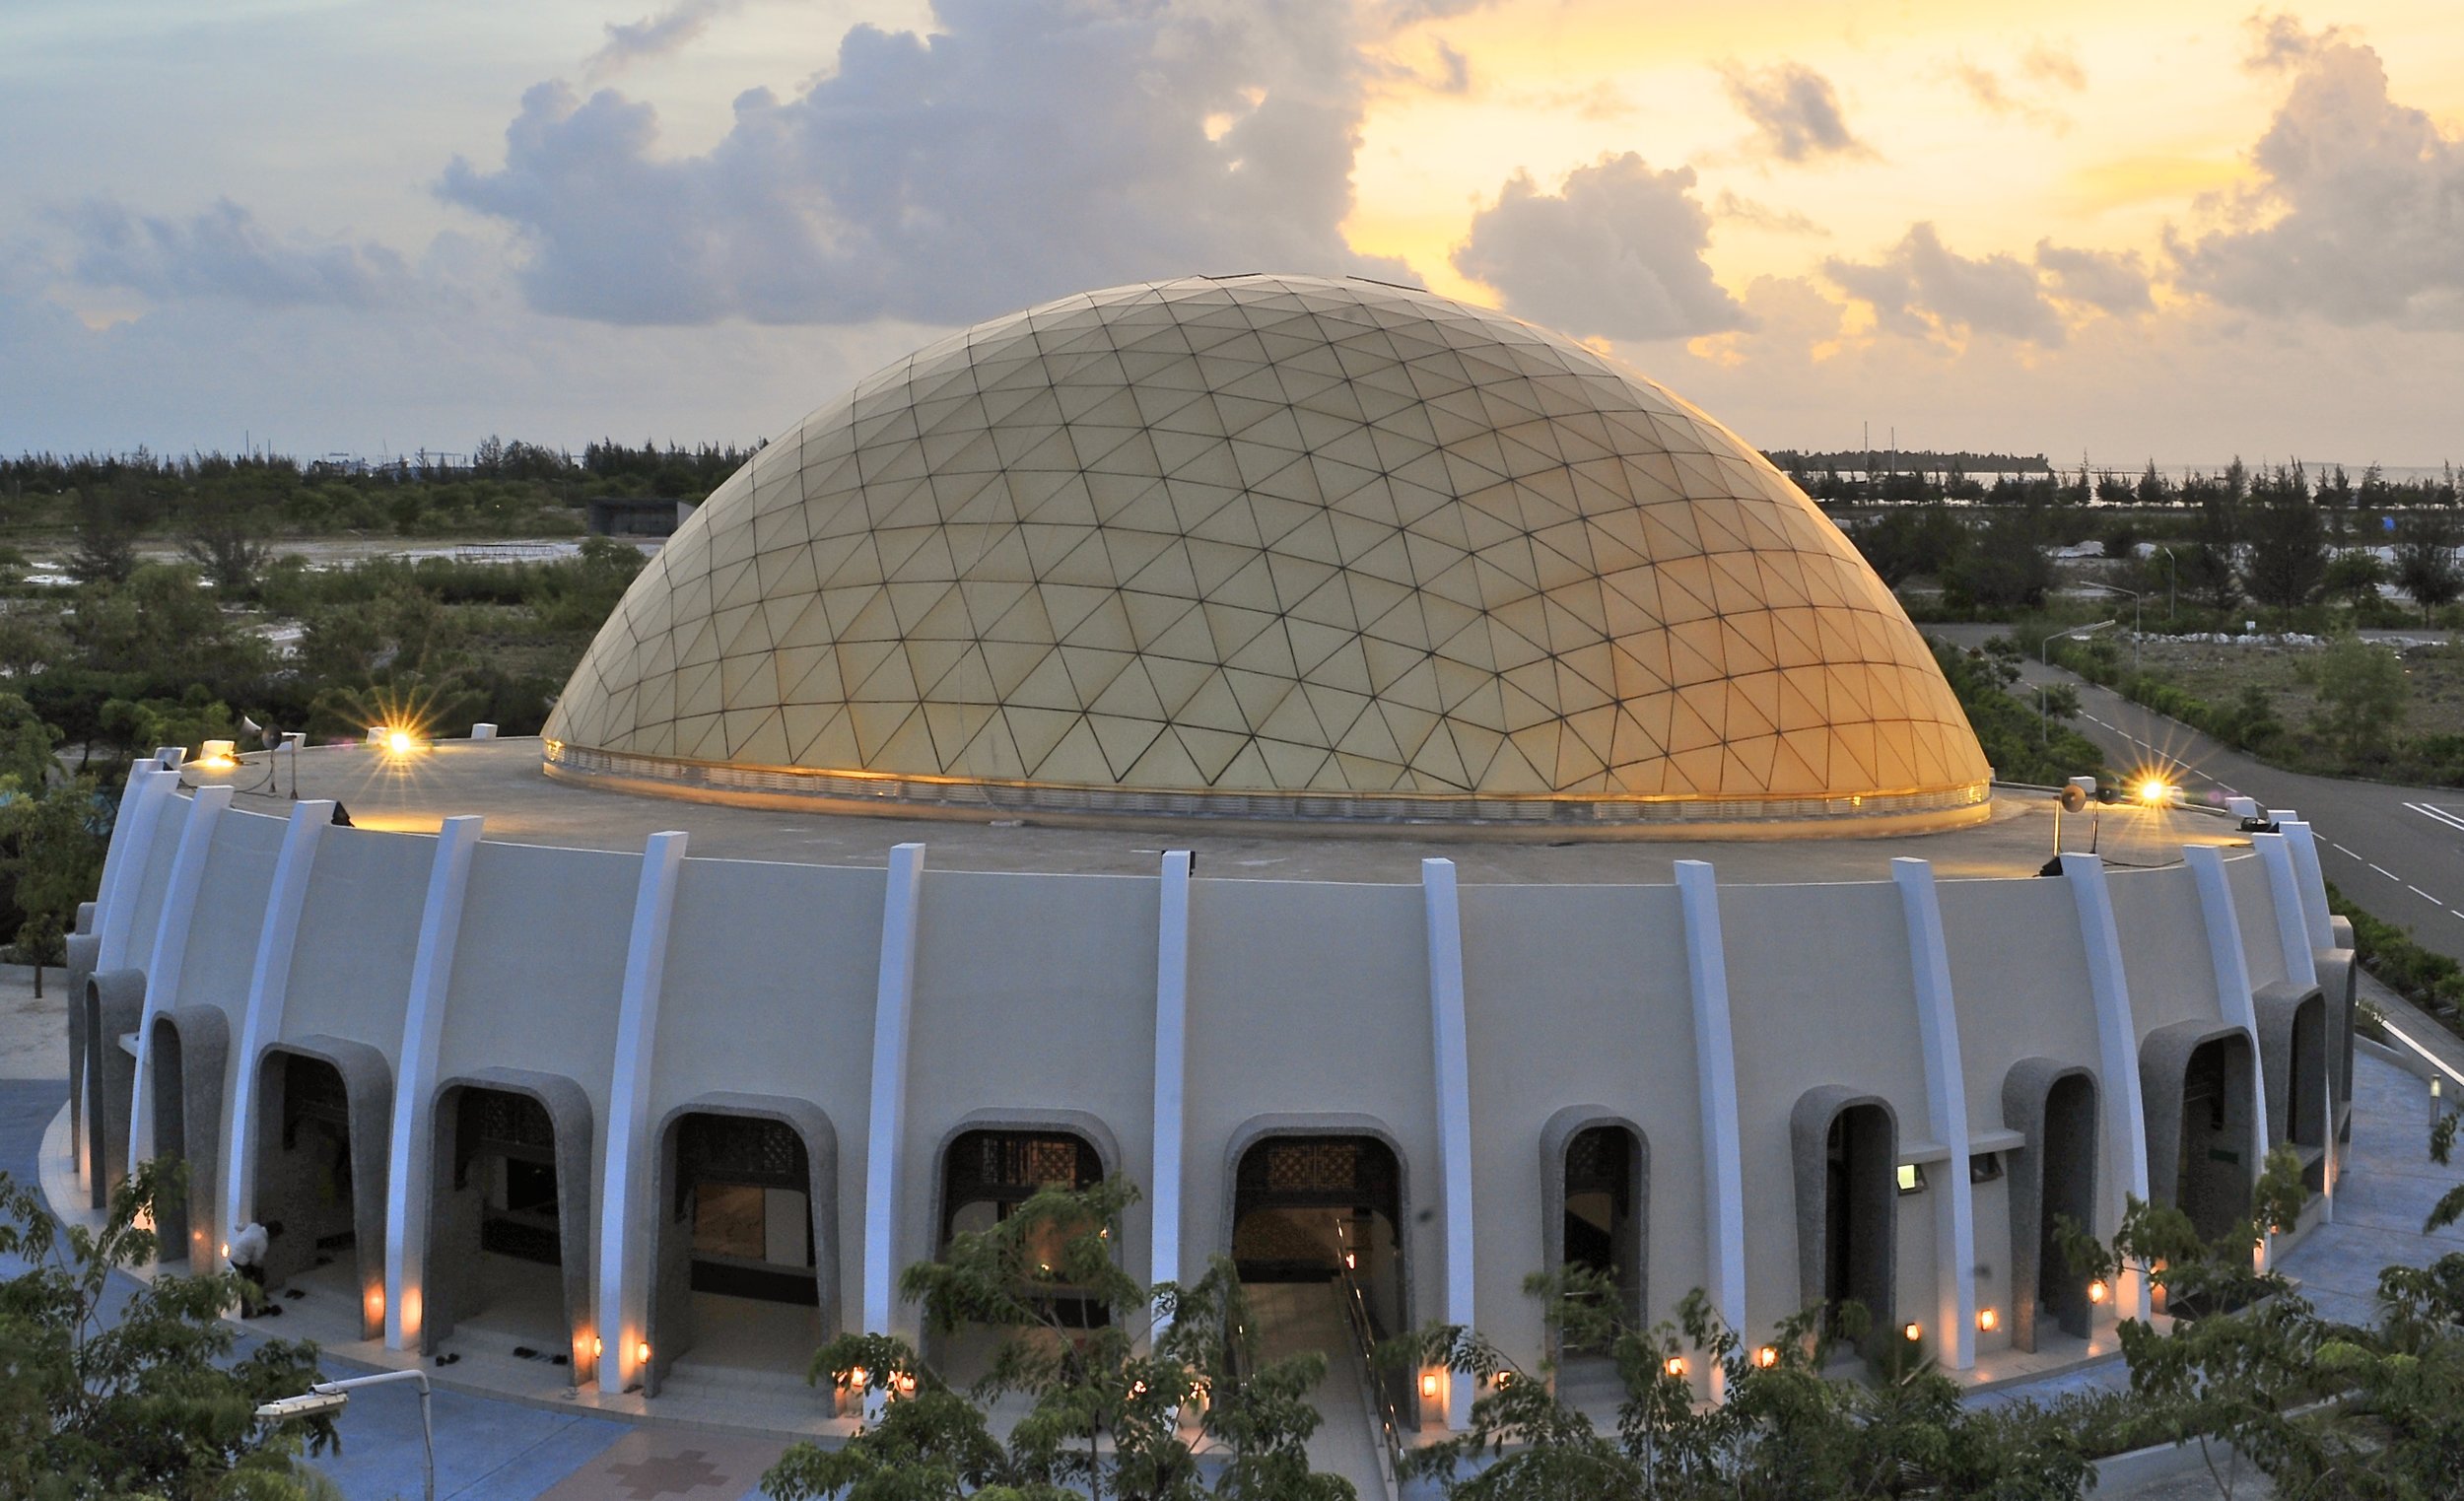 The Hulhumale Mosque in the Maldives is recognized as one of the most beautiful places of worship in South Asia.